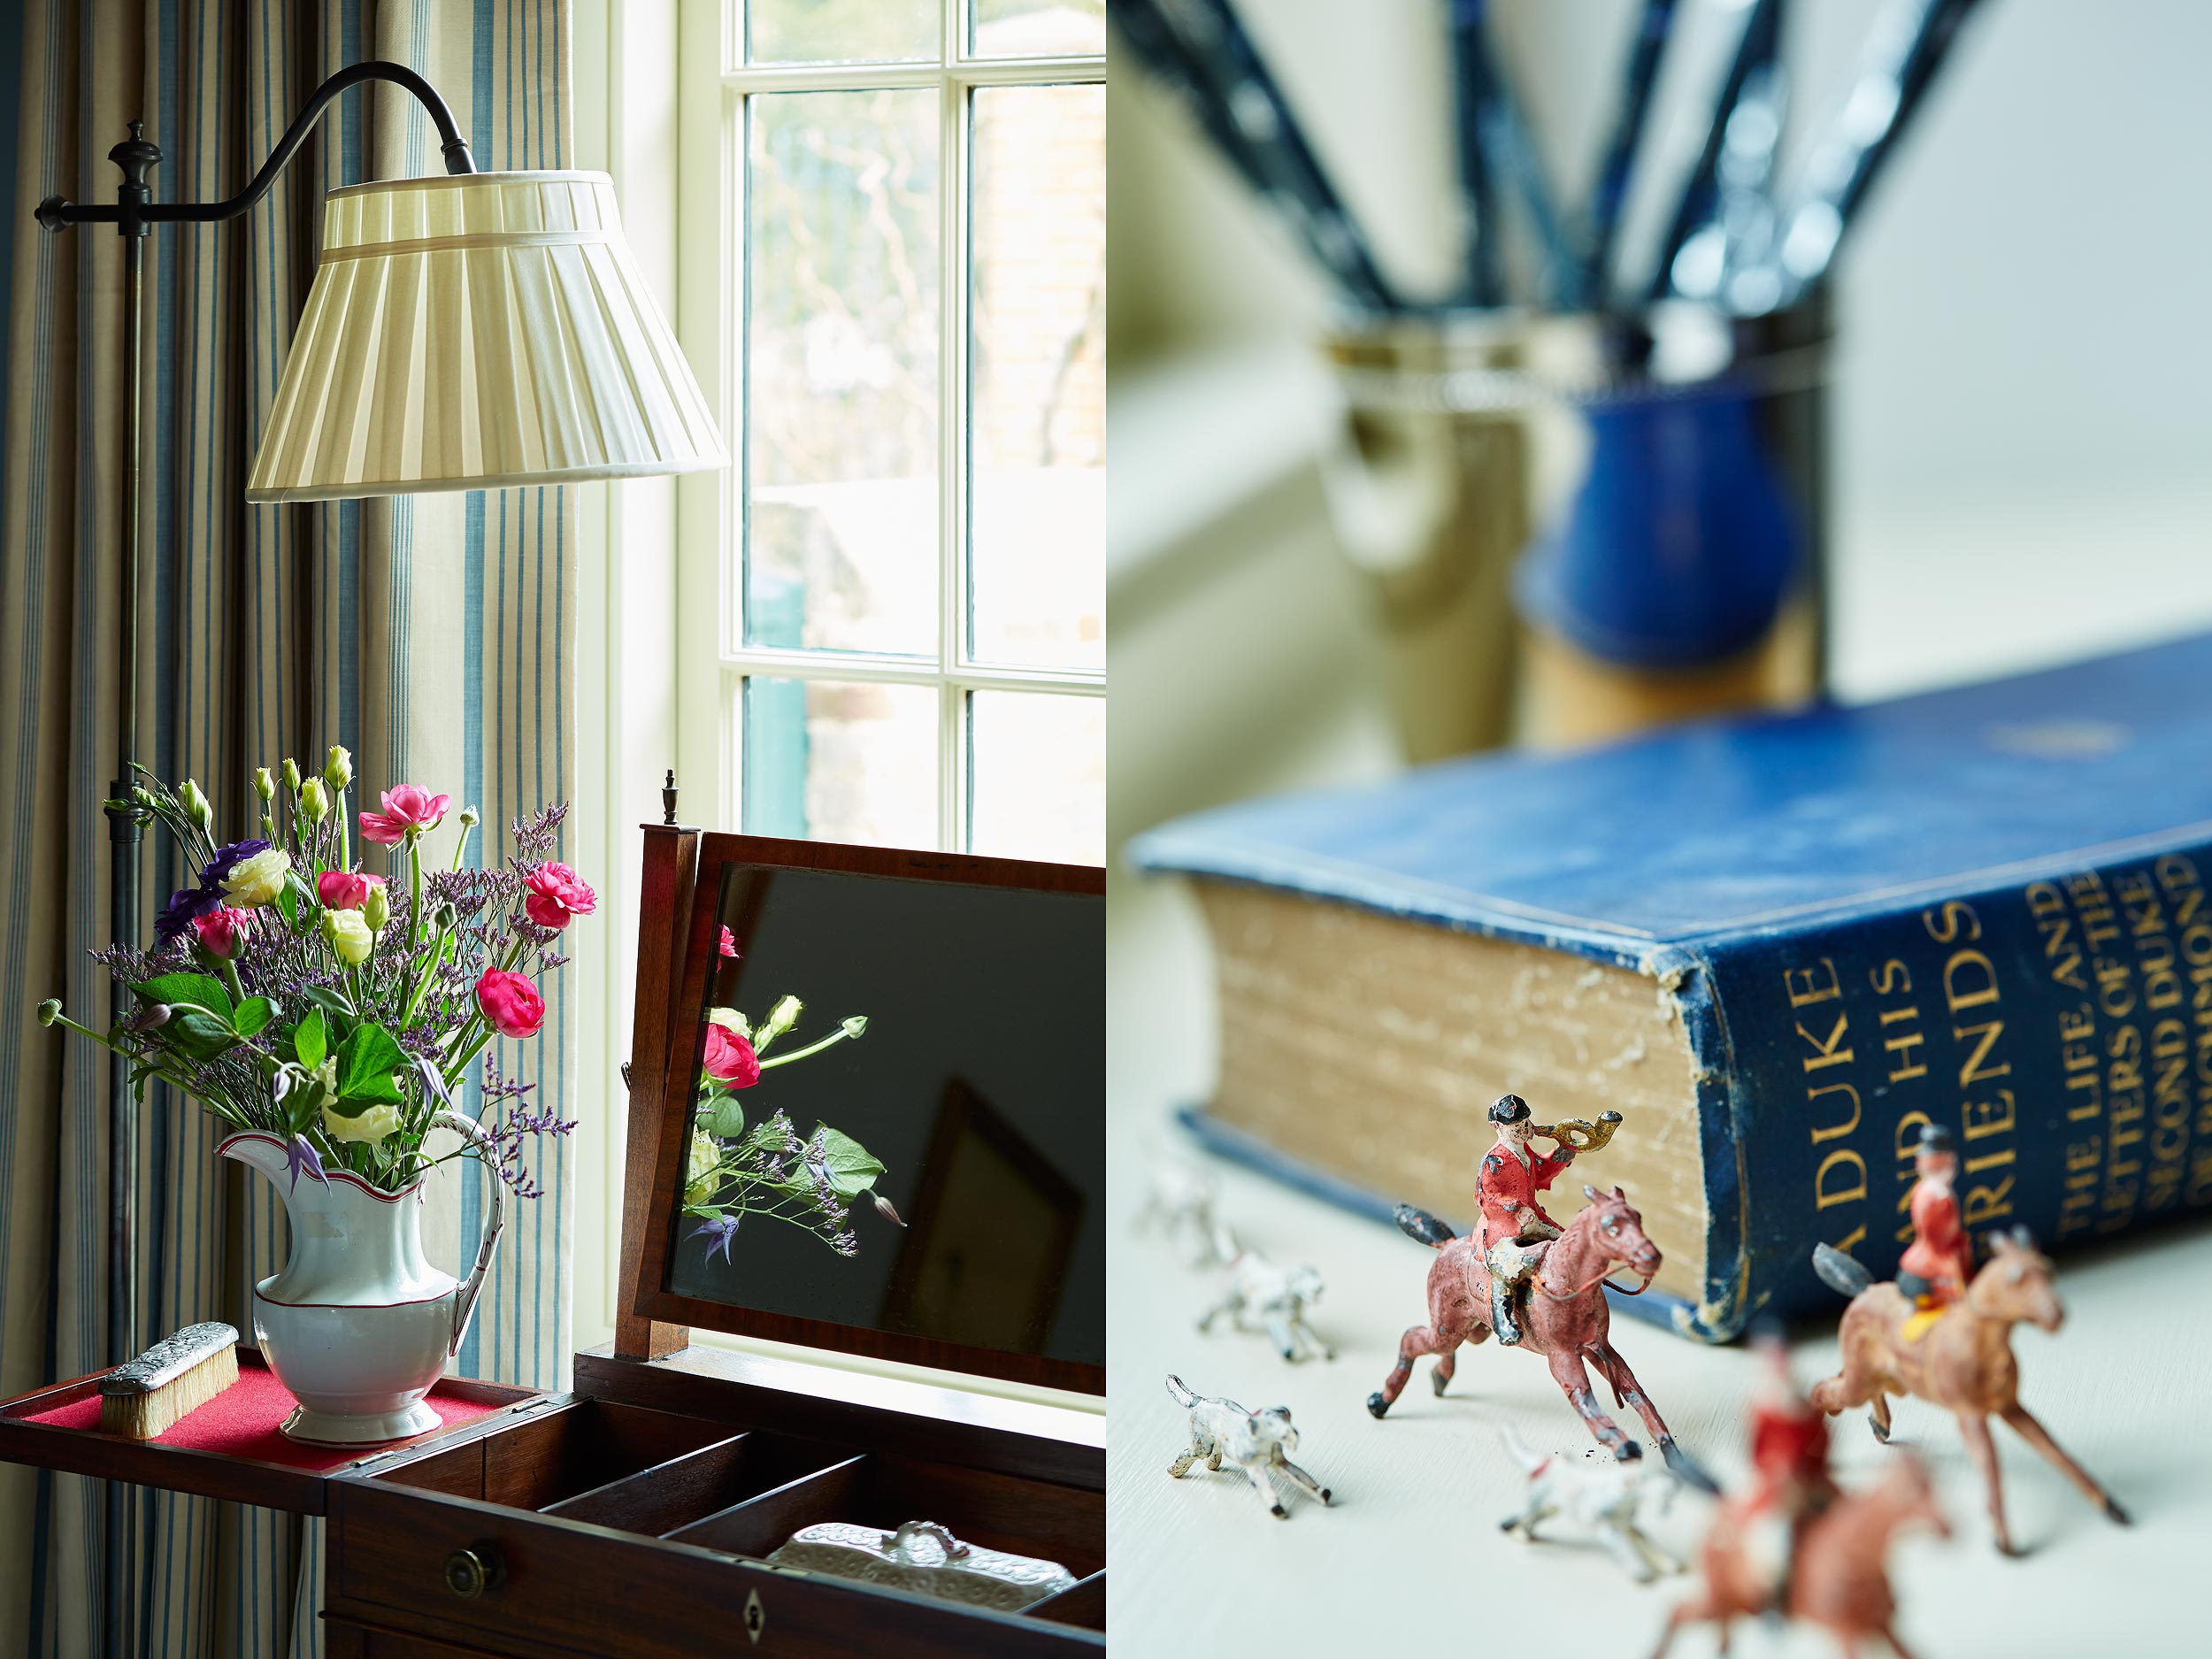 Bedroom details at Hound Lodge, Goodwood, Sussex, UK.  Estate photography by Mike Caldwell